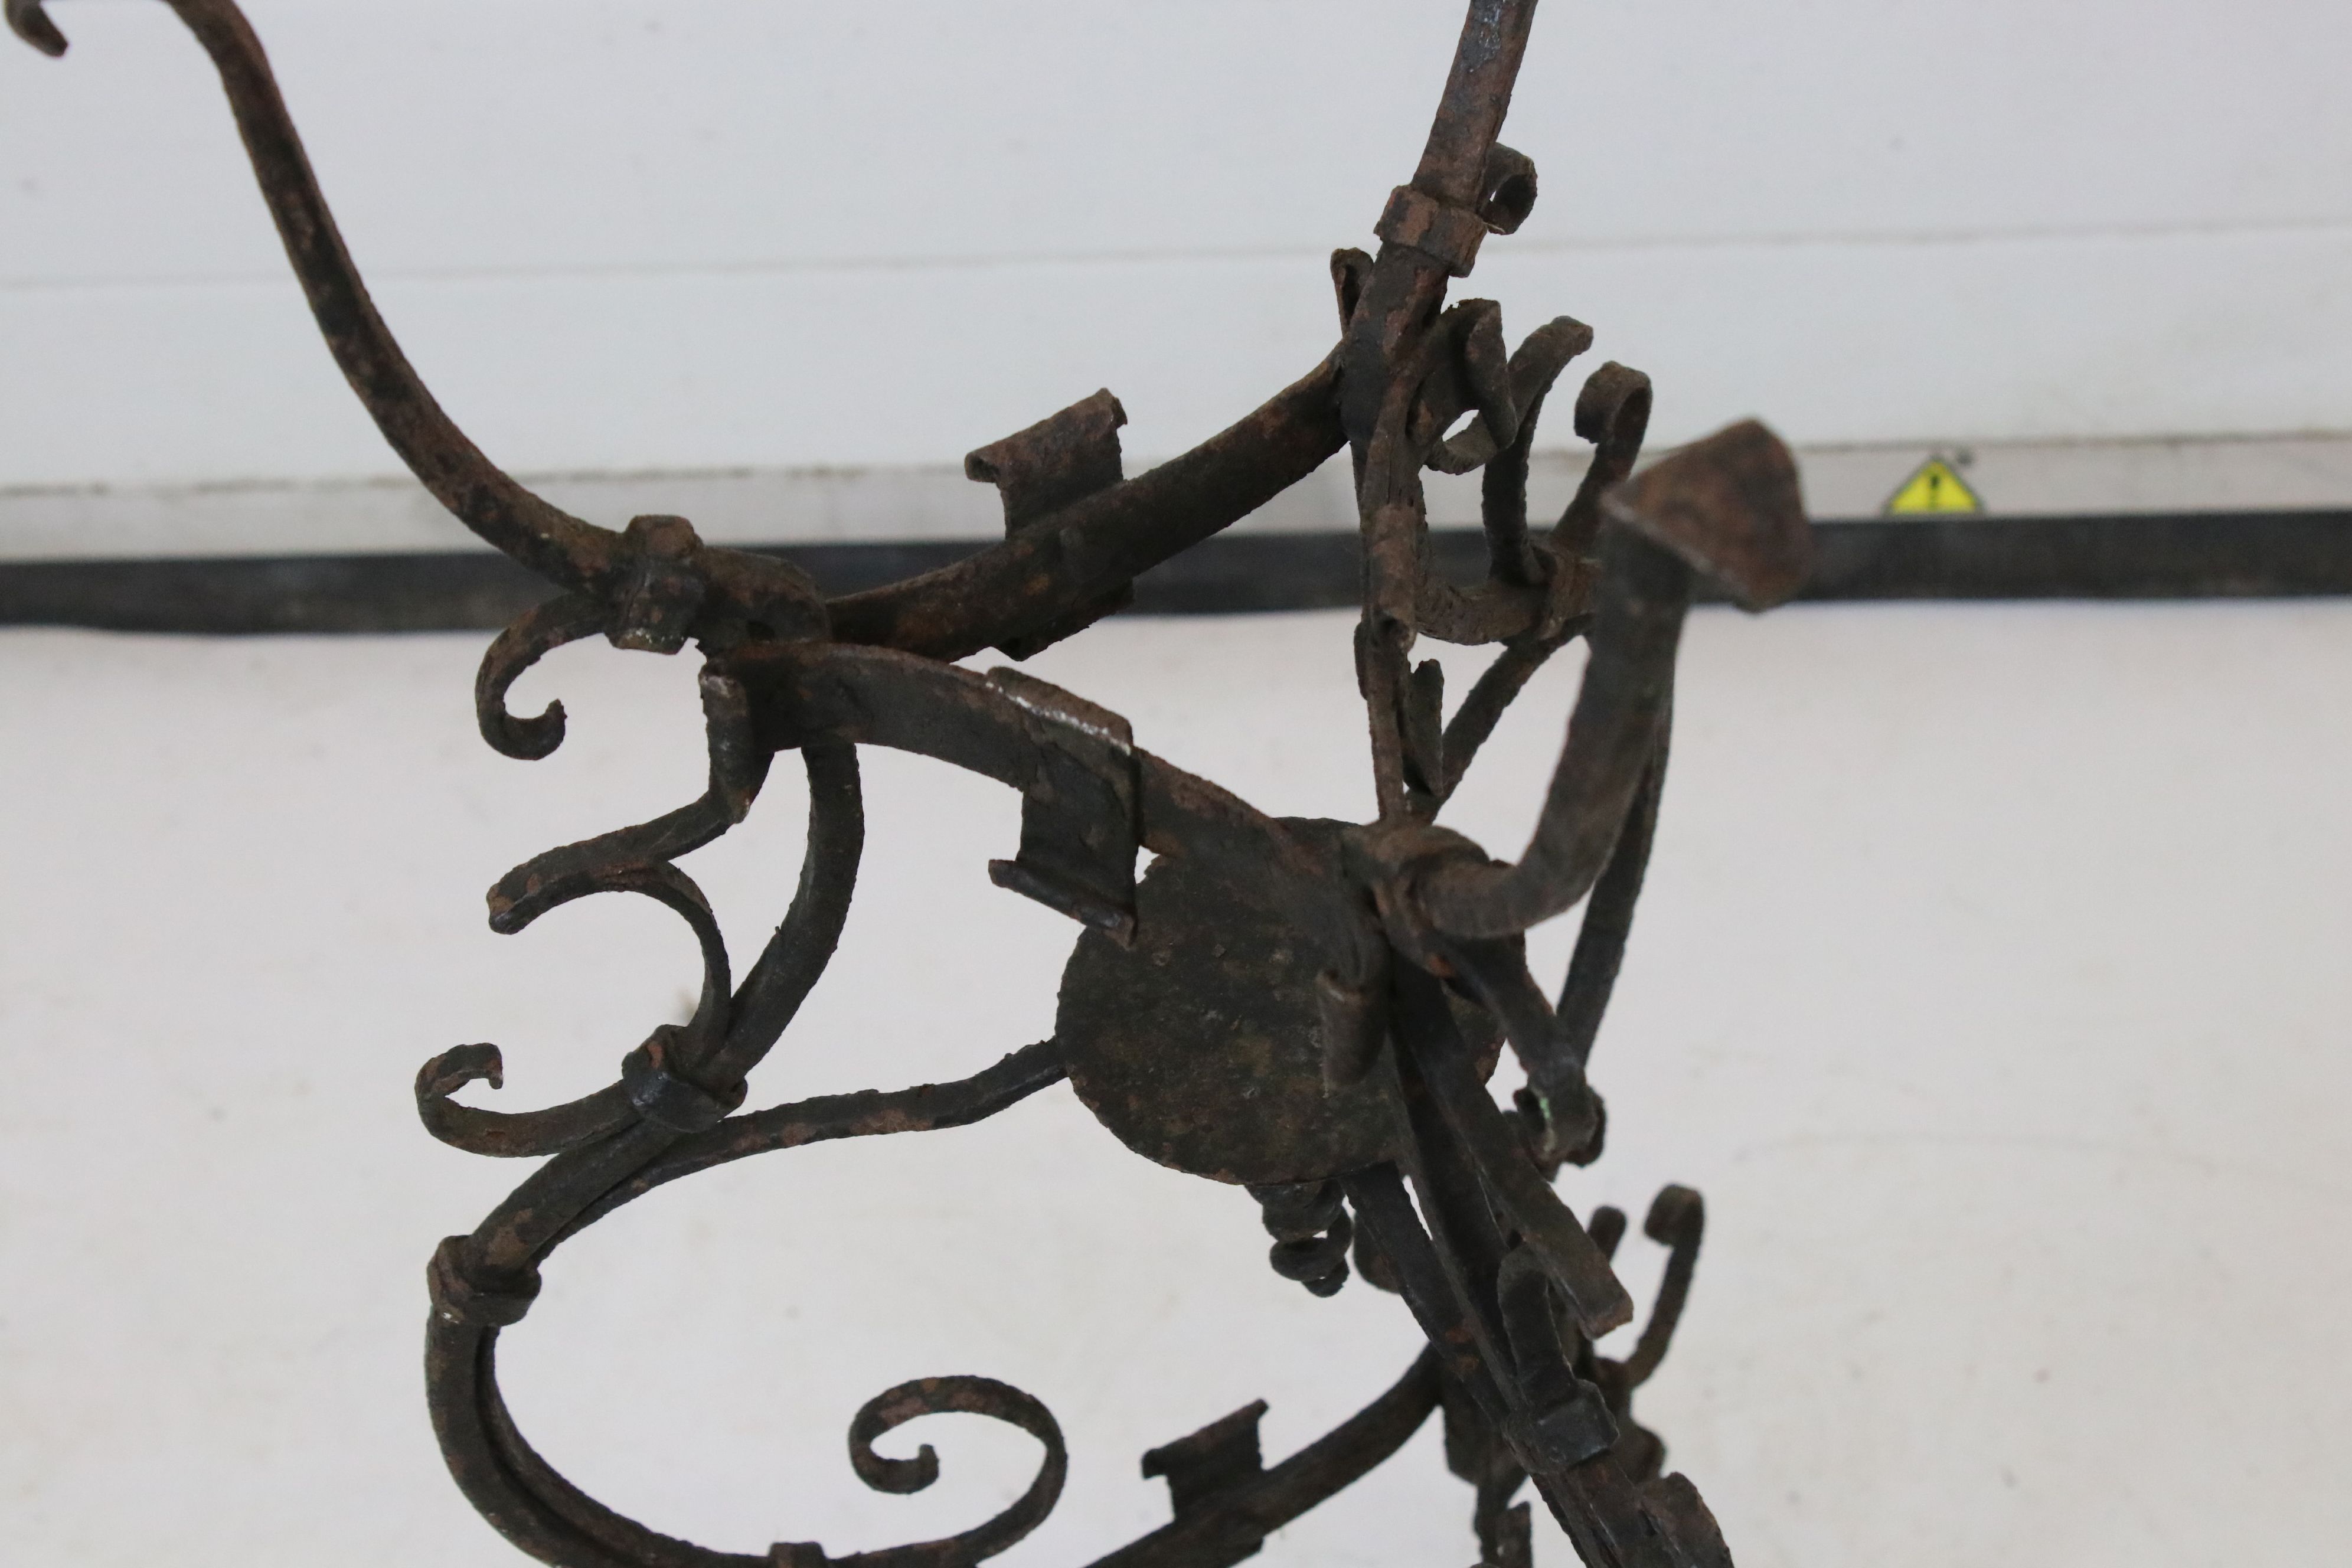 Early 19th century Ornate Wrought Iron Tripod Stand with a later Art Nouveau Copper Jardiniere - Image 6 of 6